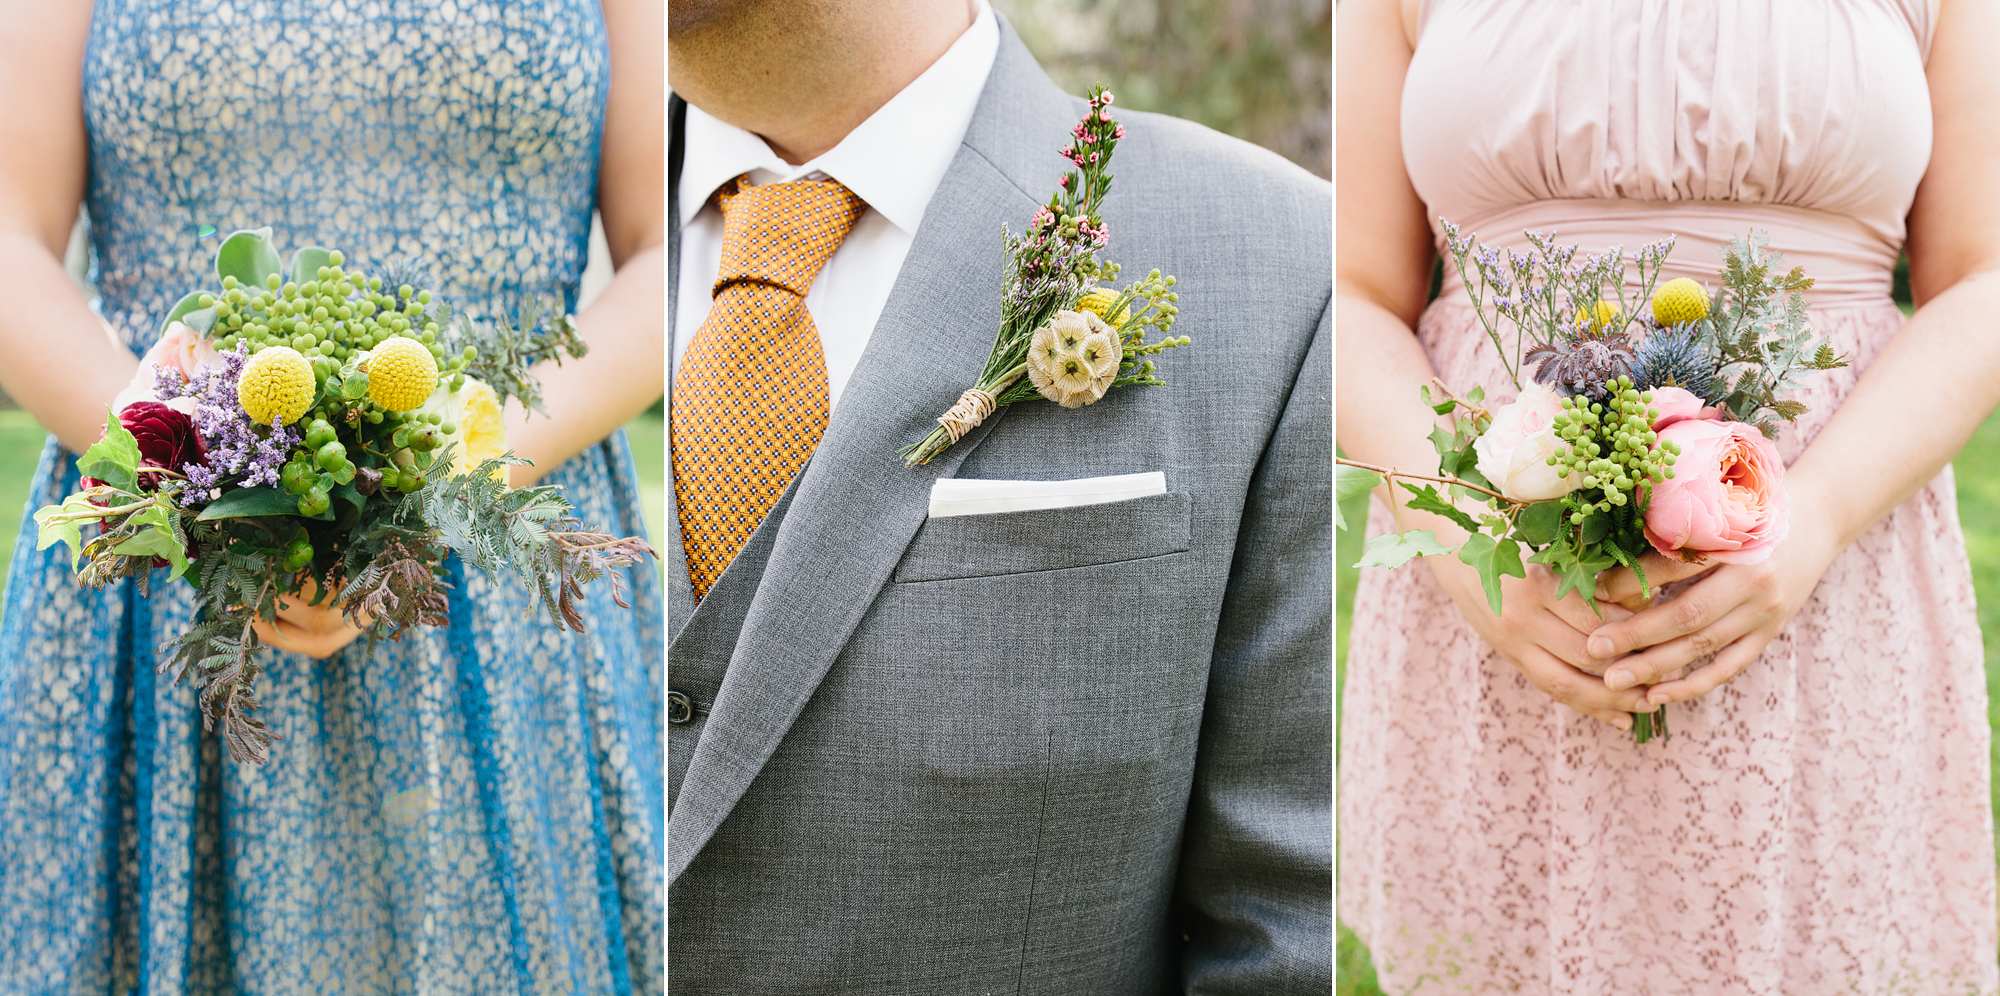 These are detail photos of the groomsmens' boutennieres and the bridesmaids' bouquets.